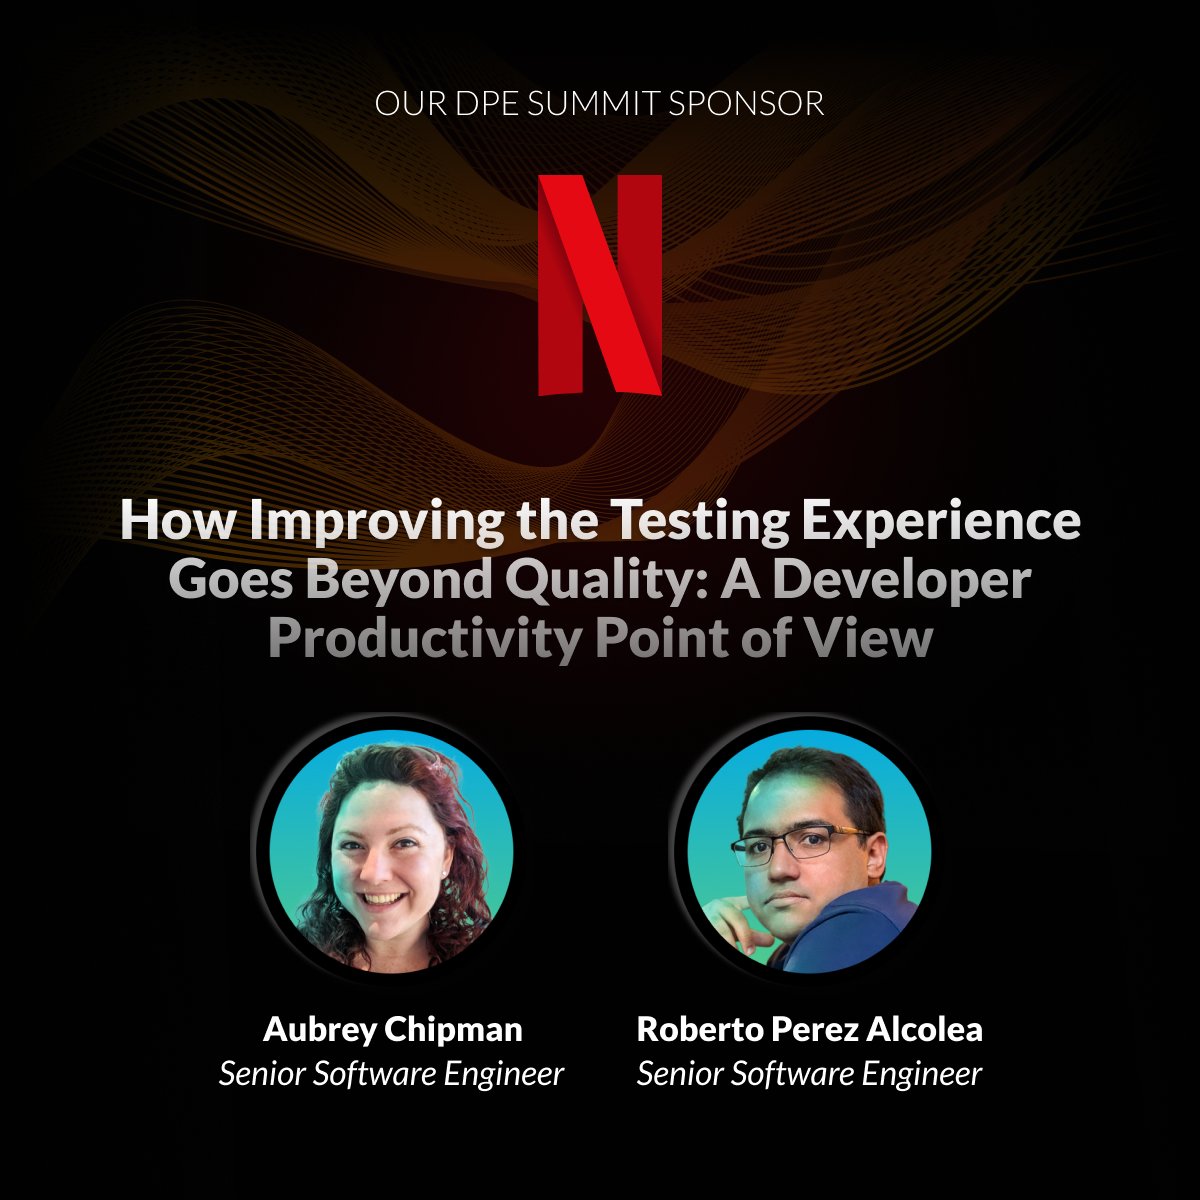 Join @NetflixEng at #DPESummit23 and hear some of their #DPE and #DX best practices & tools. Netflix will sponsor this year’s event as well as present “How Improving the Testing Experience Goes Beyond Quality: A Developer Productivity Point of View” (by @AubreyChipman and